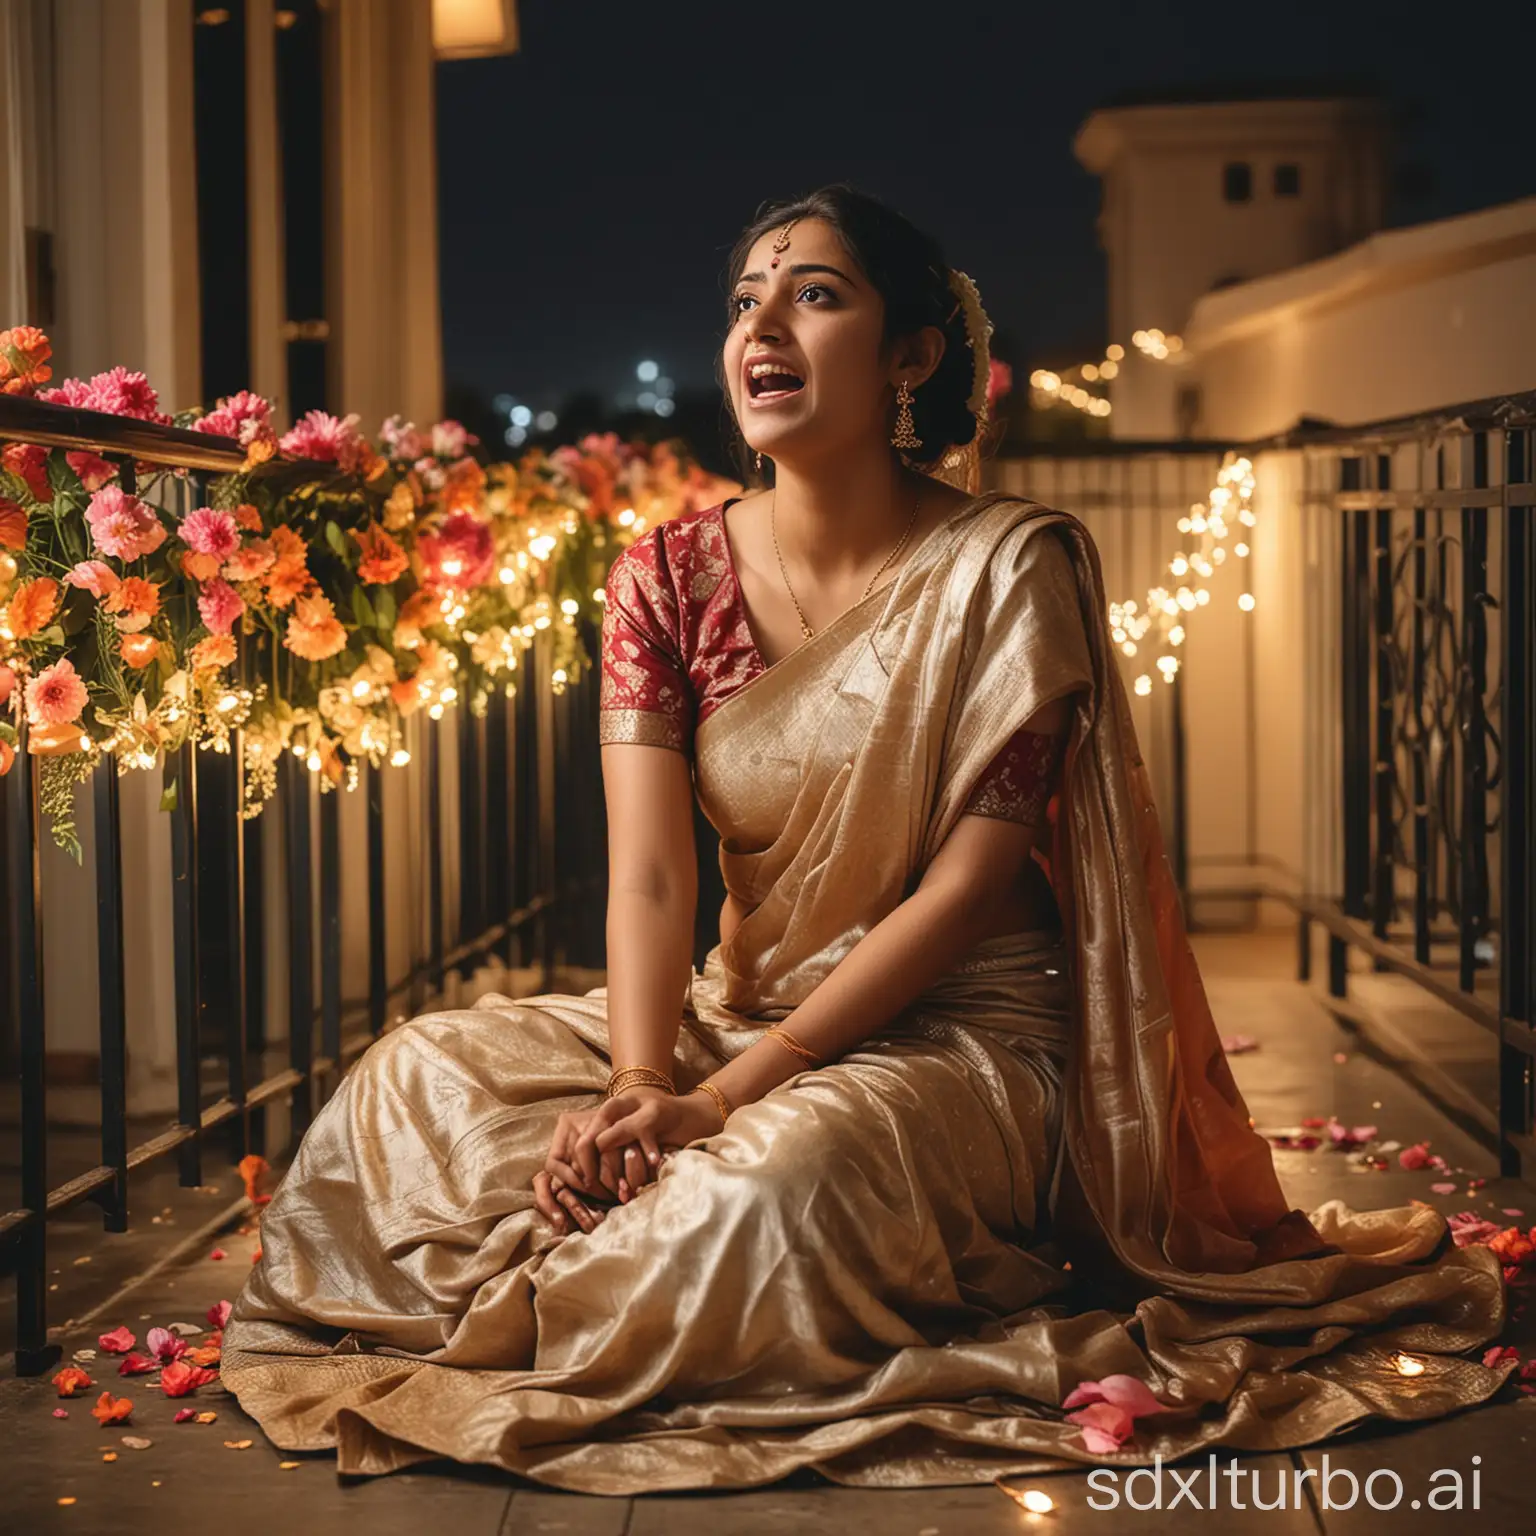 22 years old young pretty lady wearing silk saree bridal look, screaming in fear, sitting on the floor, on a balcony decorated with flowers and lights, at night